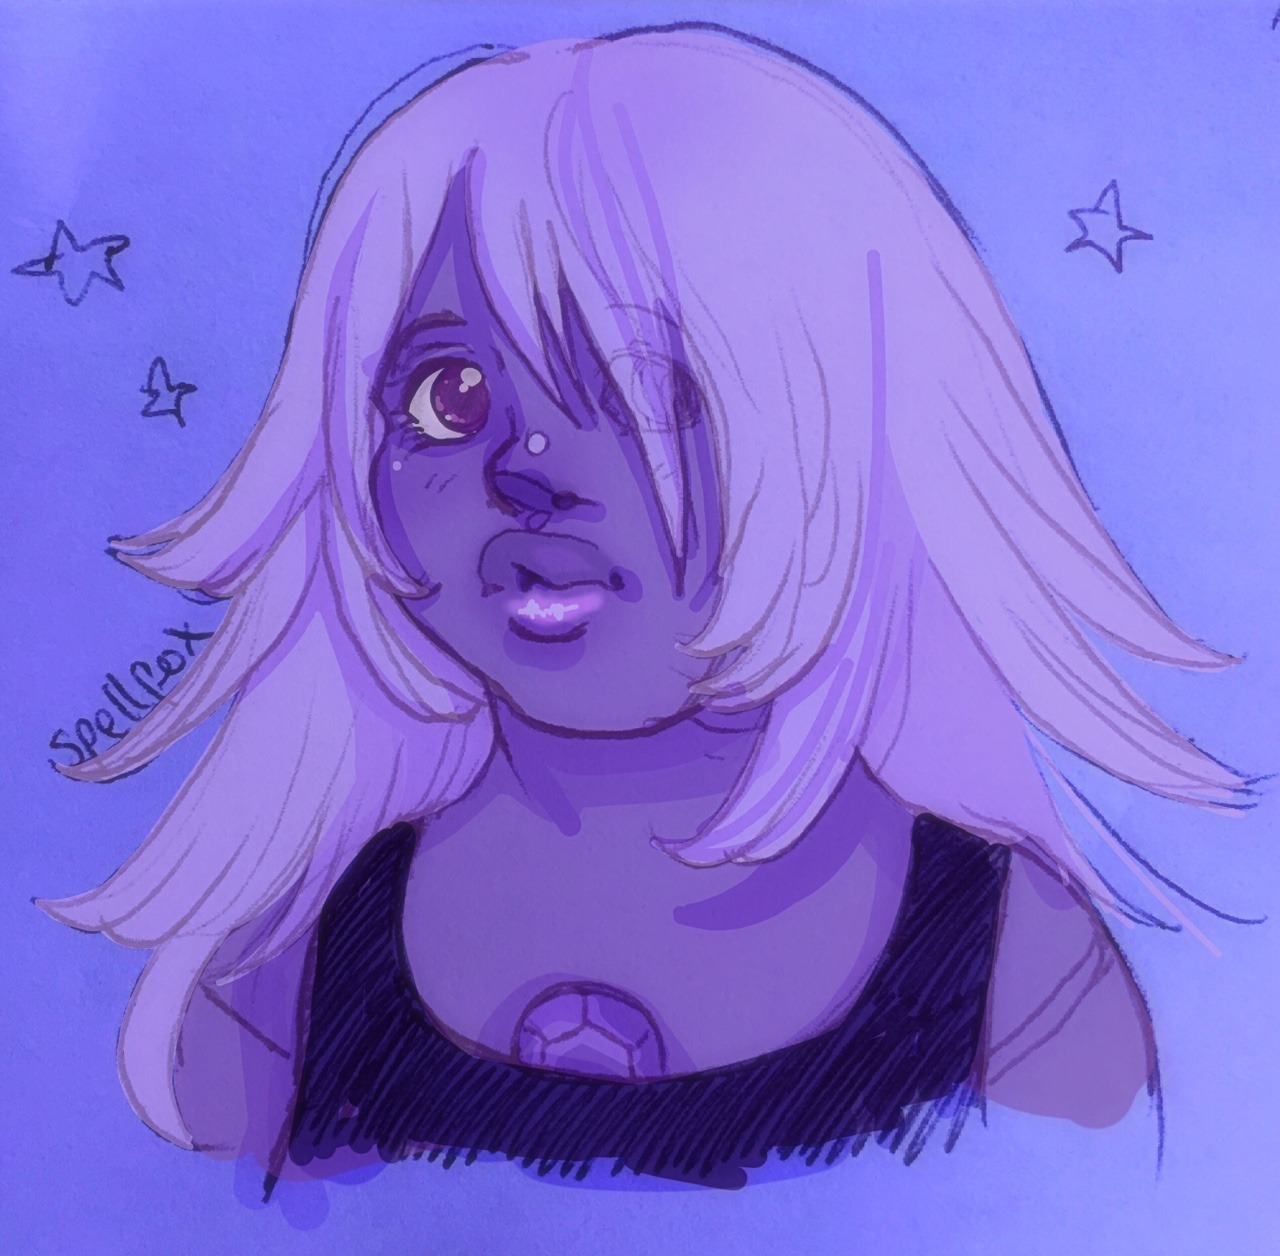 Amethyst post-it note with some digital colour